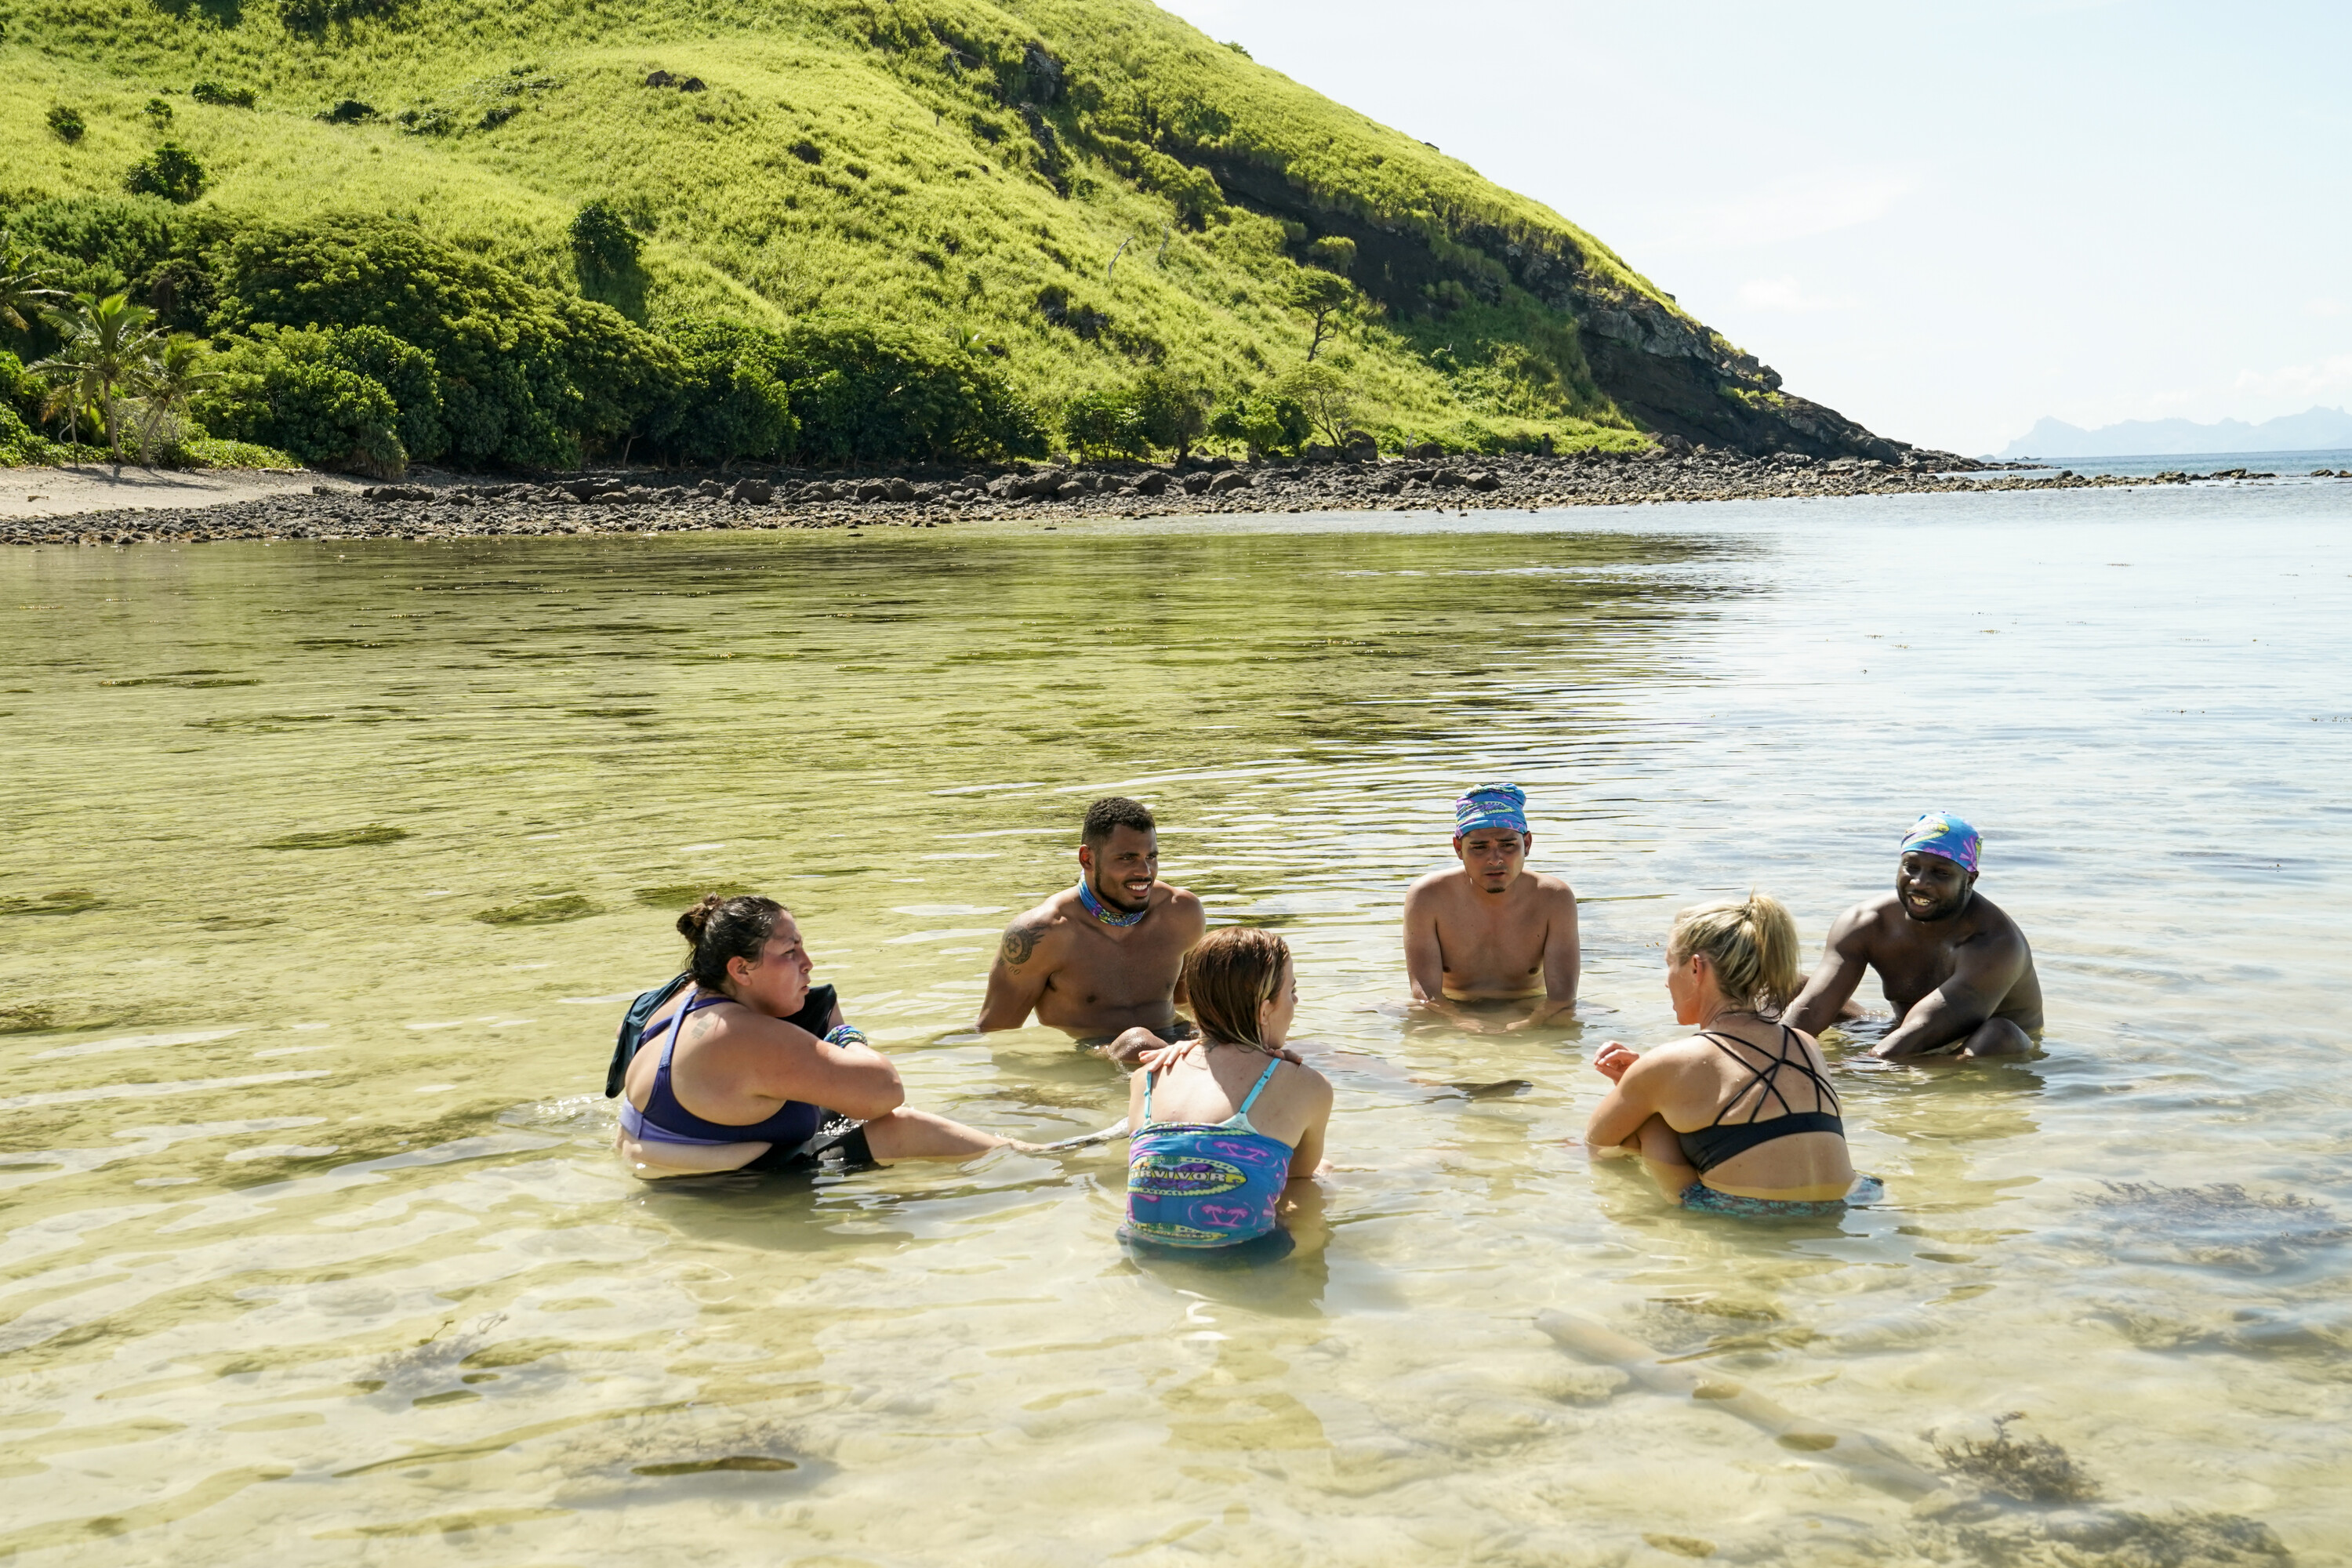 The Coco tribe — Karla Cruz Godoy, Ryan Medrano, Geo Bustamante, Cassidy Clark, Lindsay Carmine, and James Jones — sit in a circle in shallow waters in 'Survivor' Season 43, which premieres tonight, Sept. 21, on CBS.